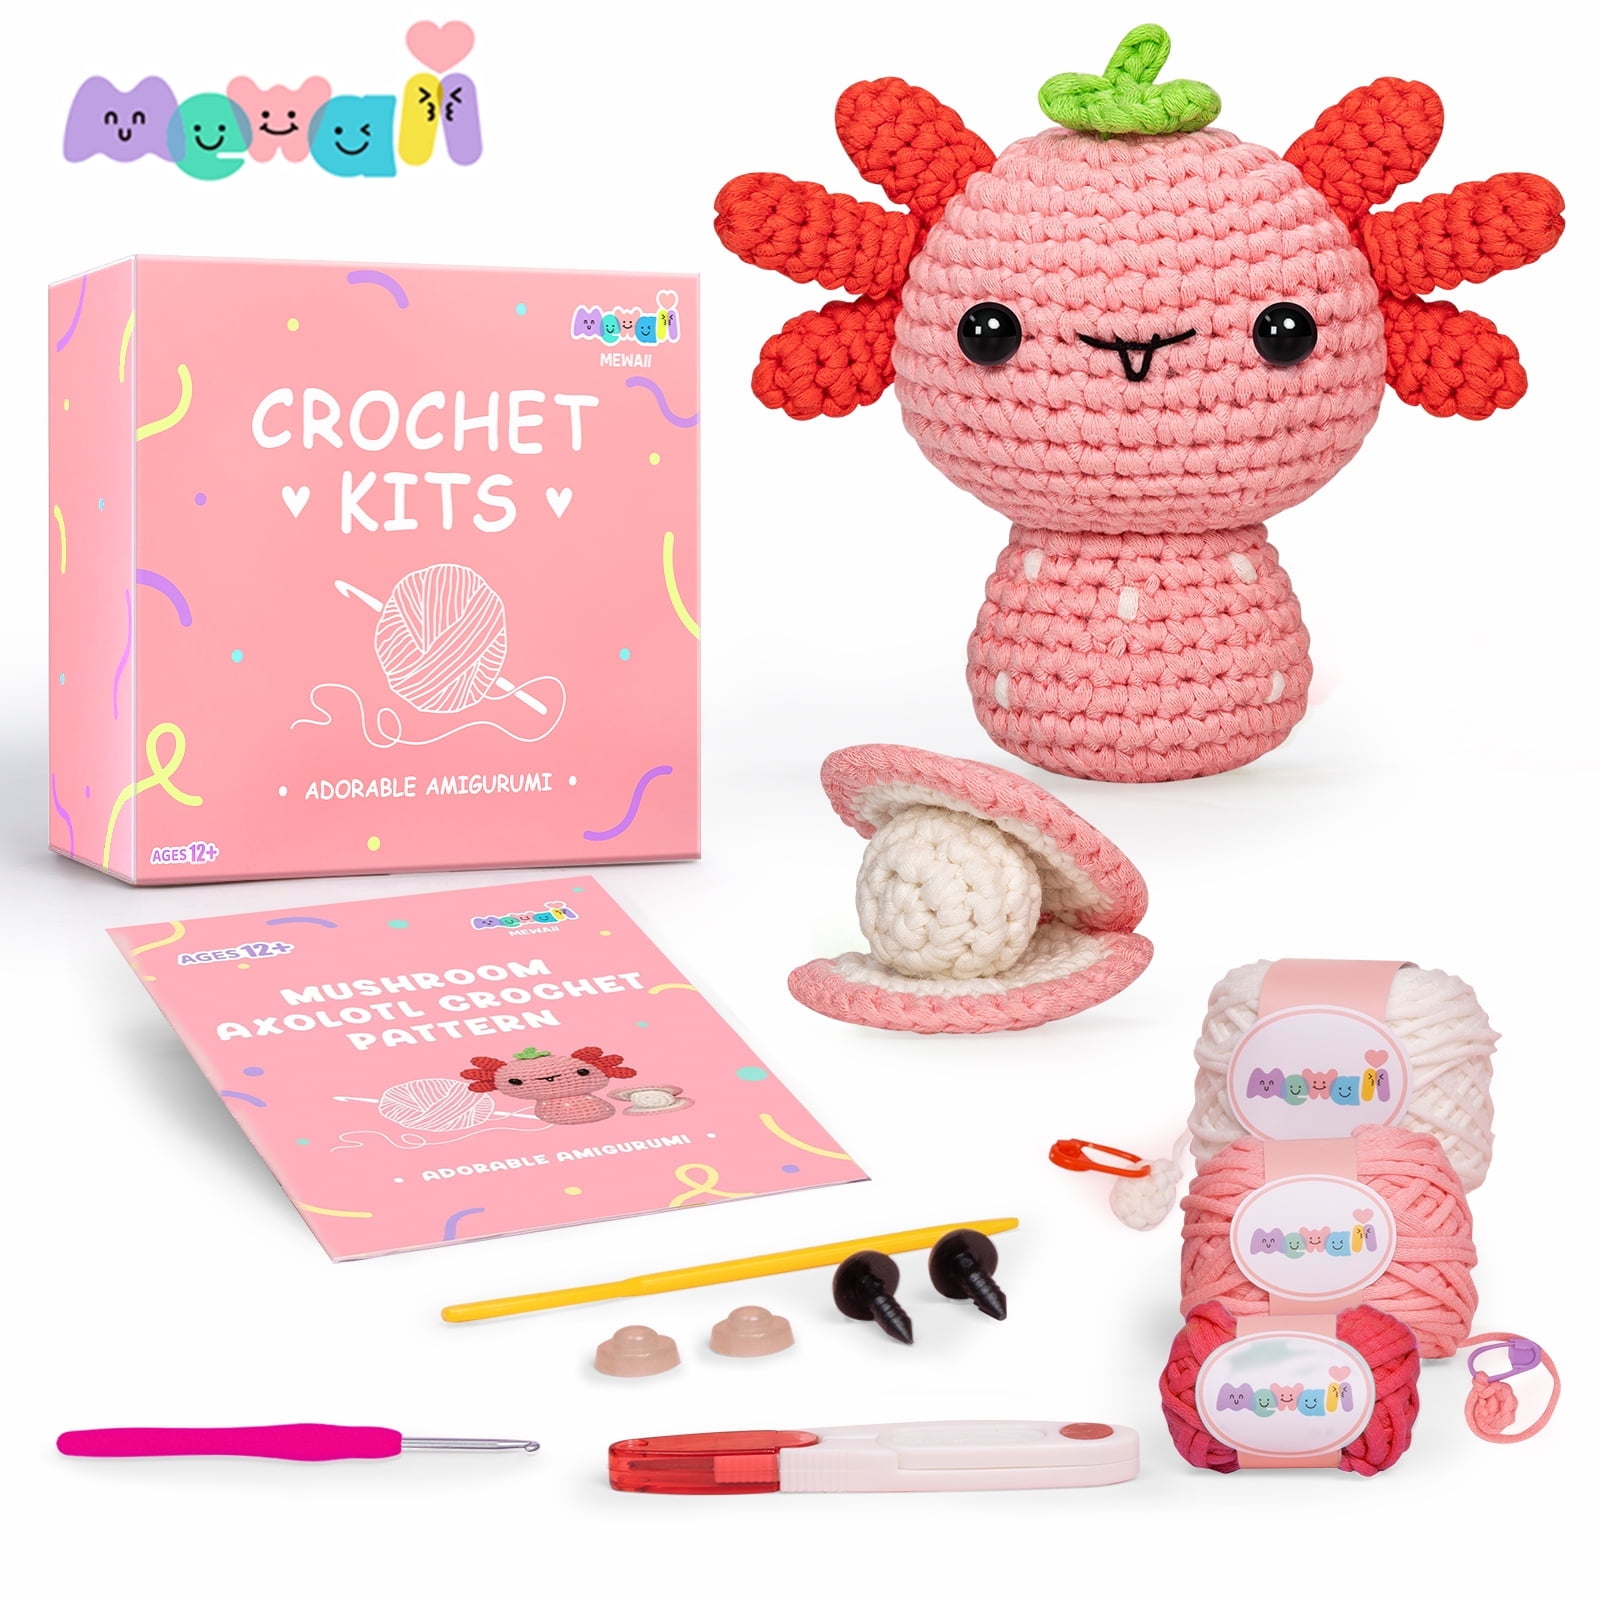 4PCS DIY Animal Crochet Kit with Step-by-Step Video Tutorials – yamaxin